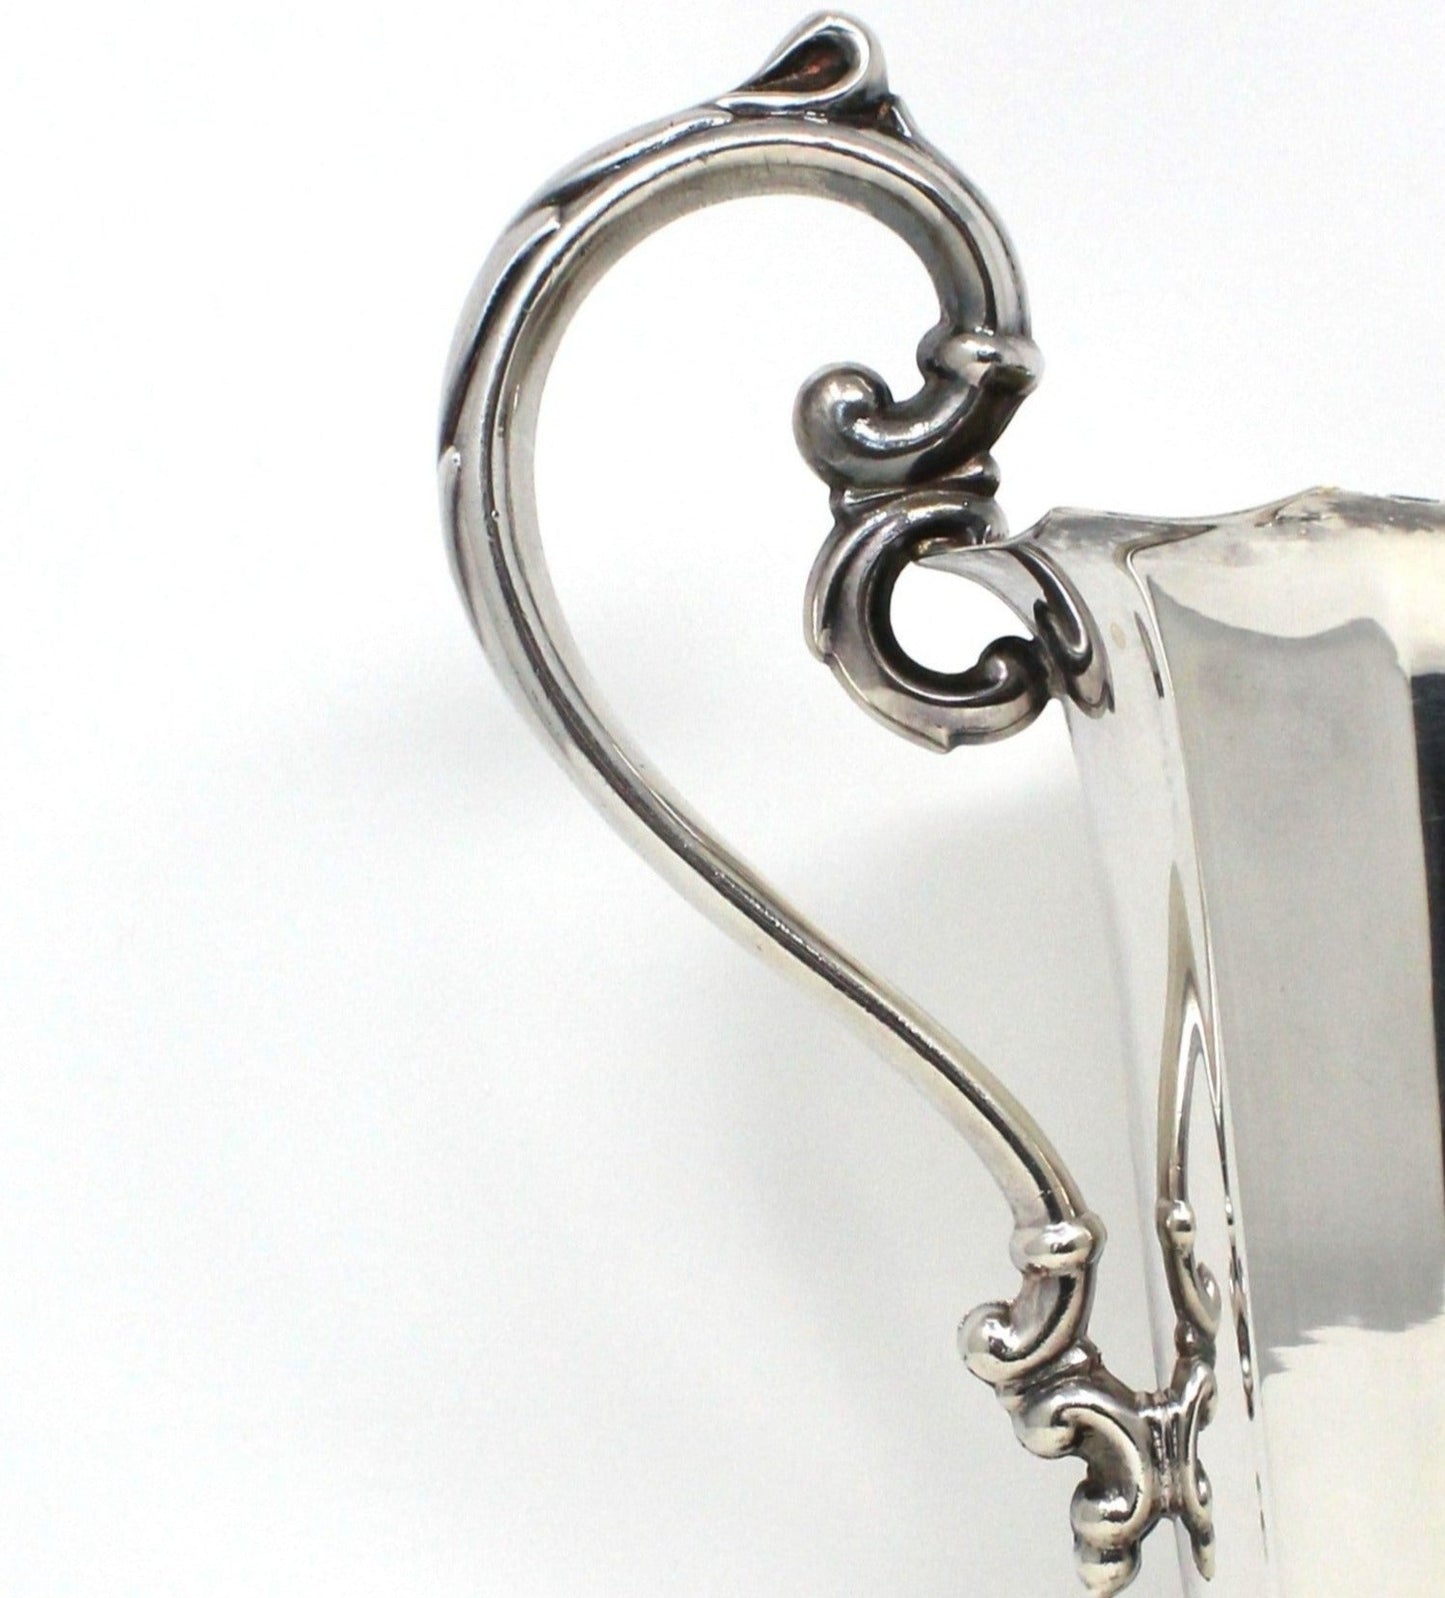 Pitcher, Silver A. Cohen & Sons, Silver Plated Beverage Pitcher w/Ice Lip, Footed, Victorian Style, Vintage